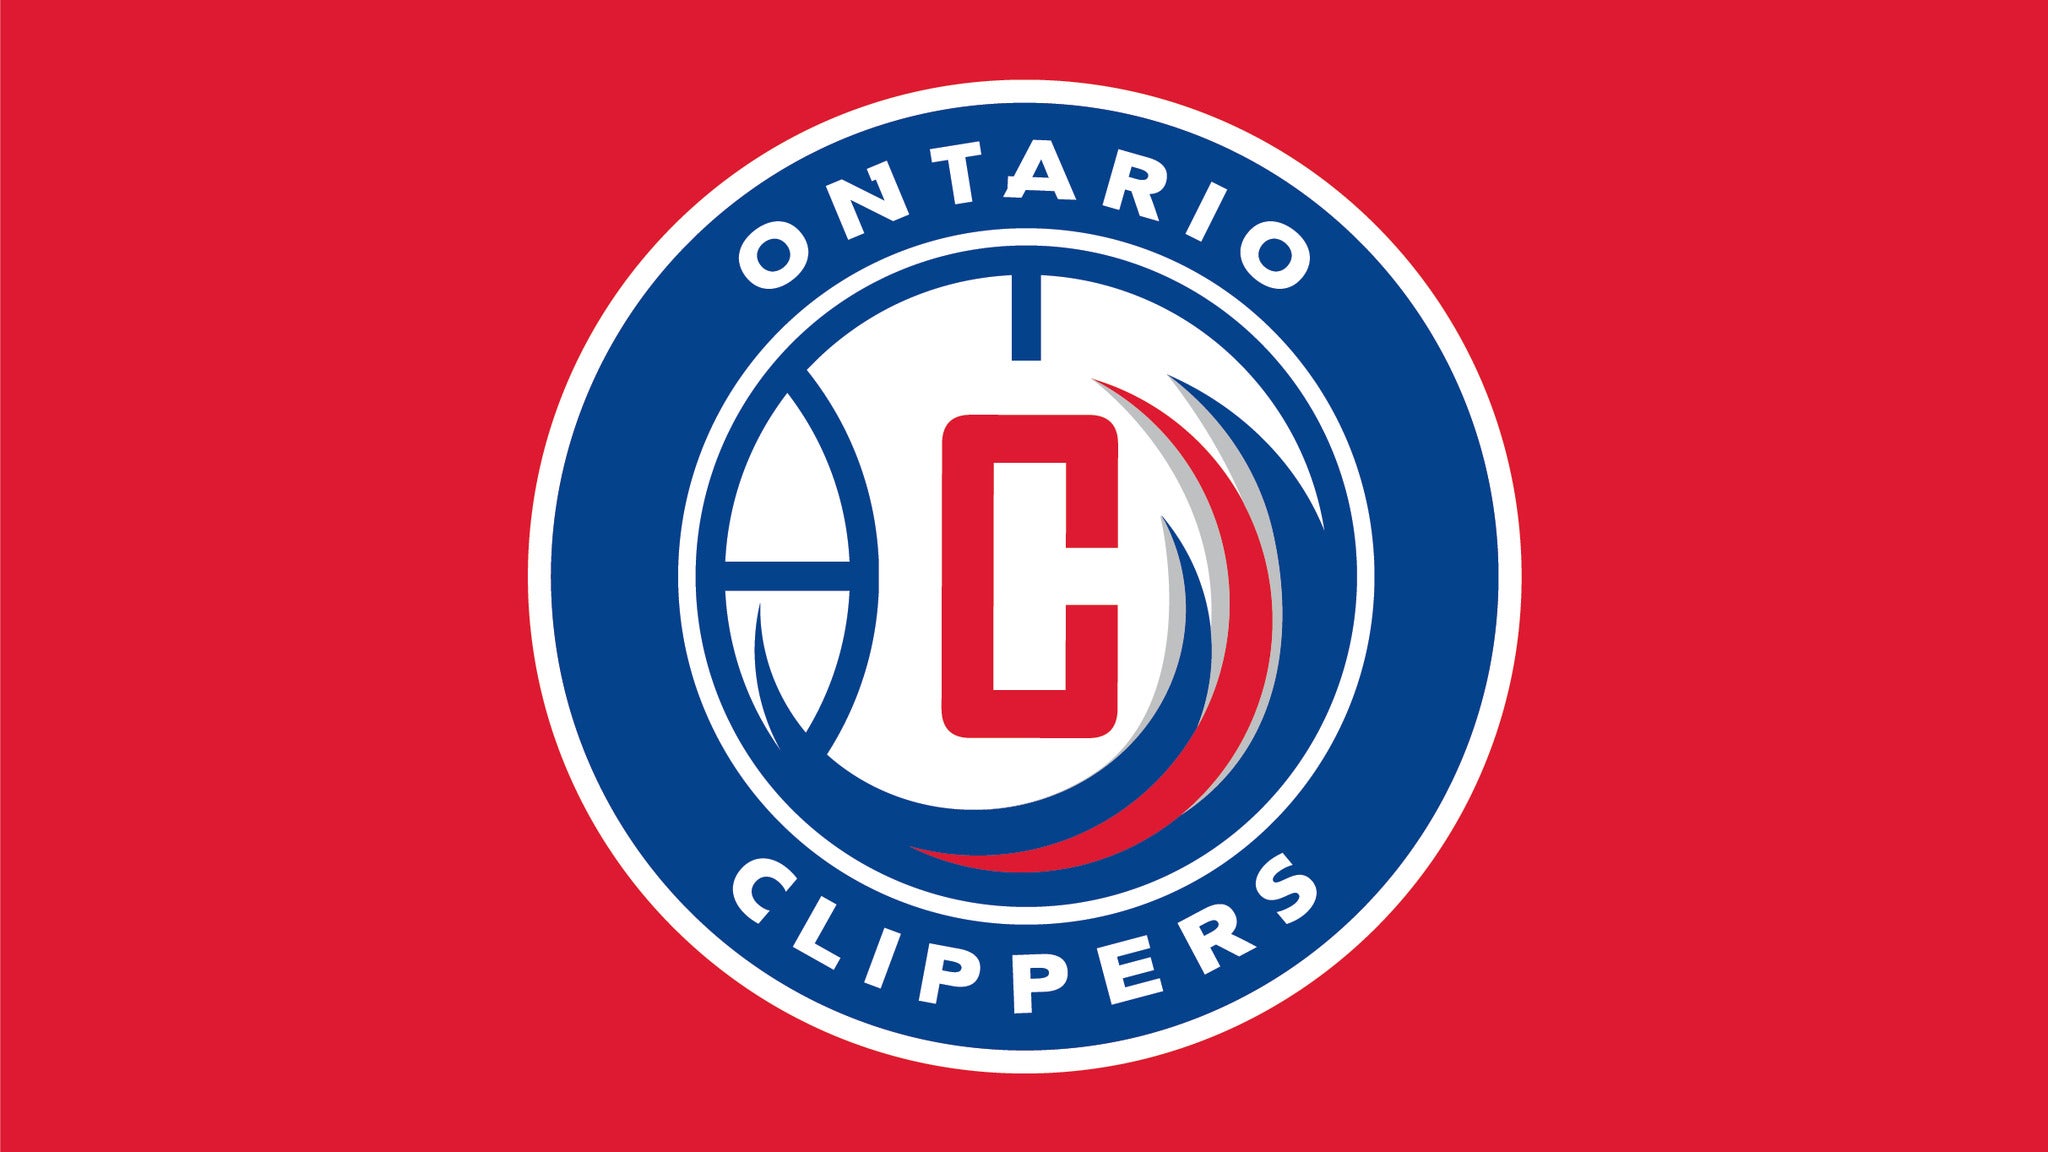 Ontario Clippers vs Austin at Toyota Arena